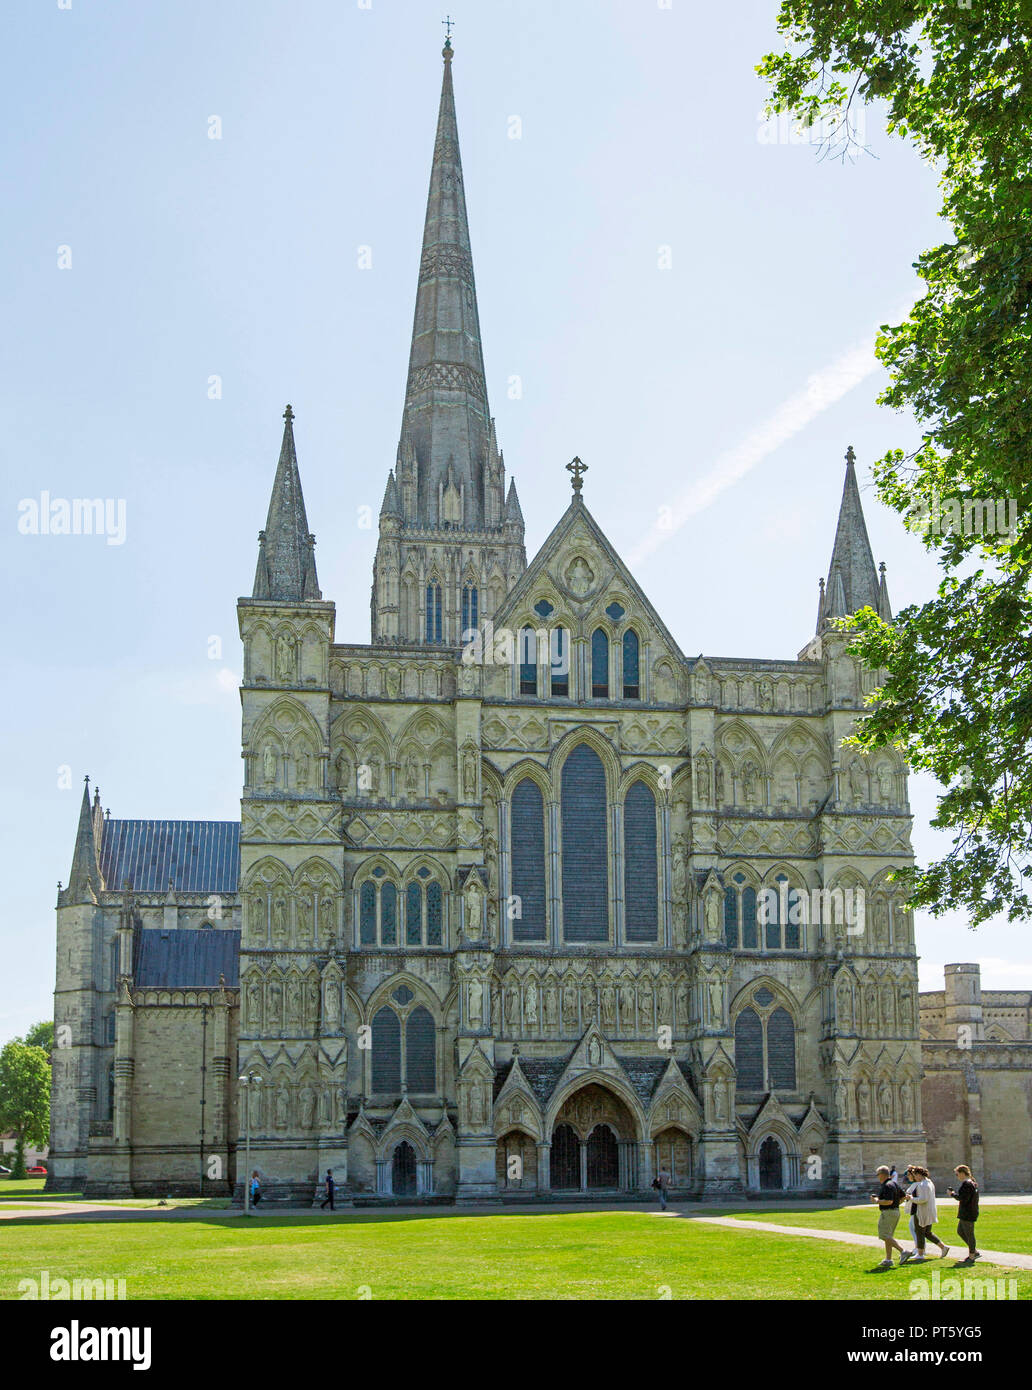 Ornate historic cathedral in Salisbury, Wiltshire England with people on lawns in foreground and spire reaching into blue sky Stock Photo